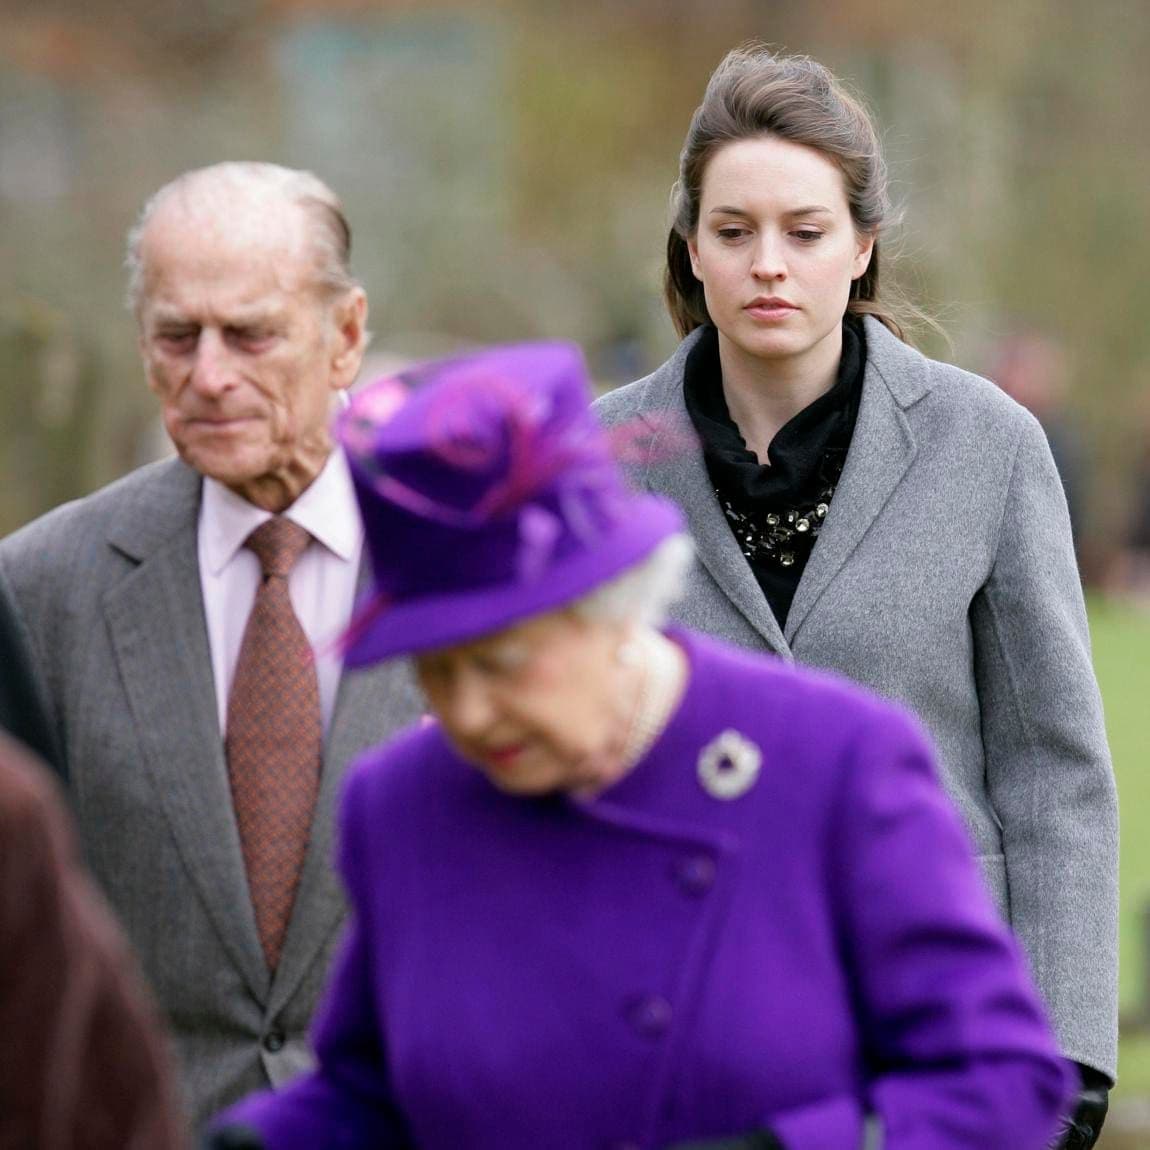 Alexandra Knatchbull's family is close with the British royals